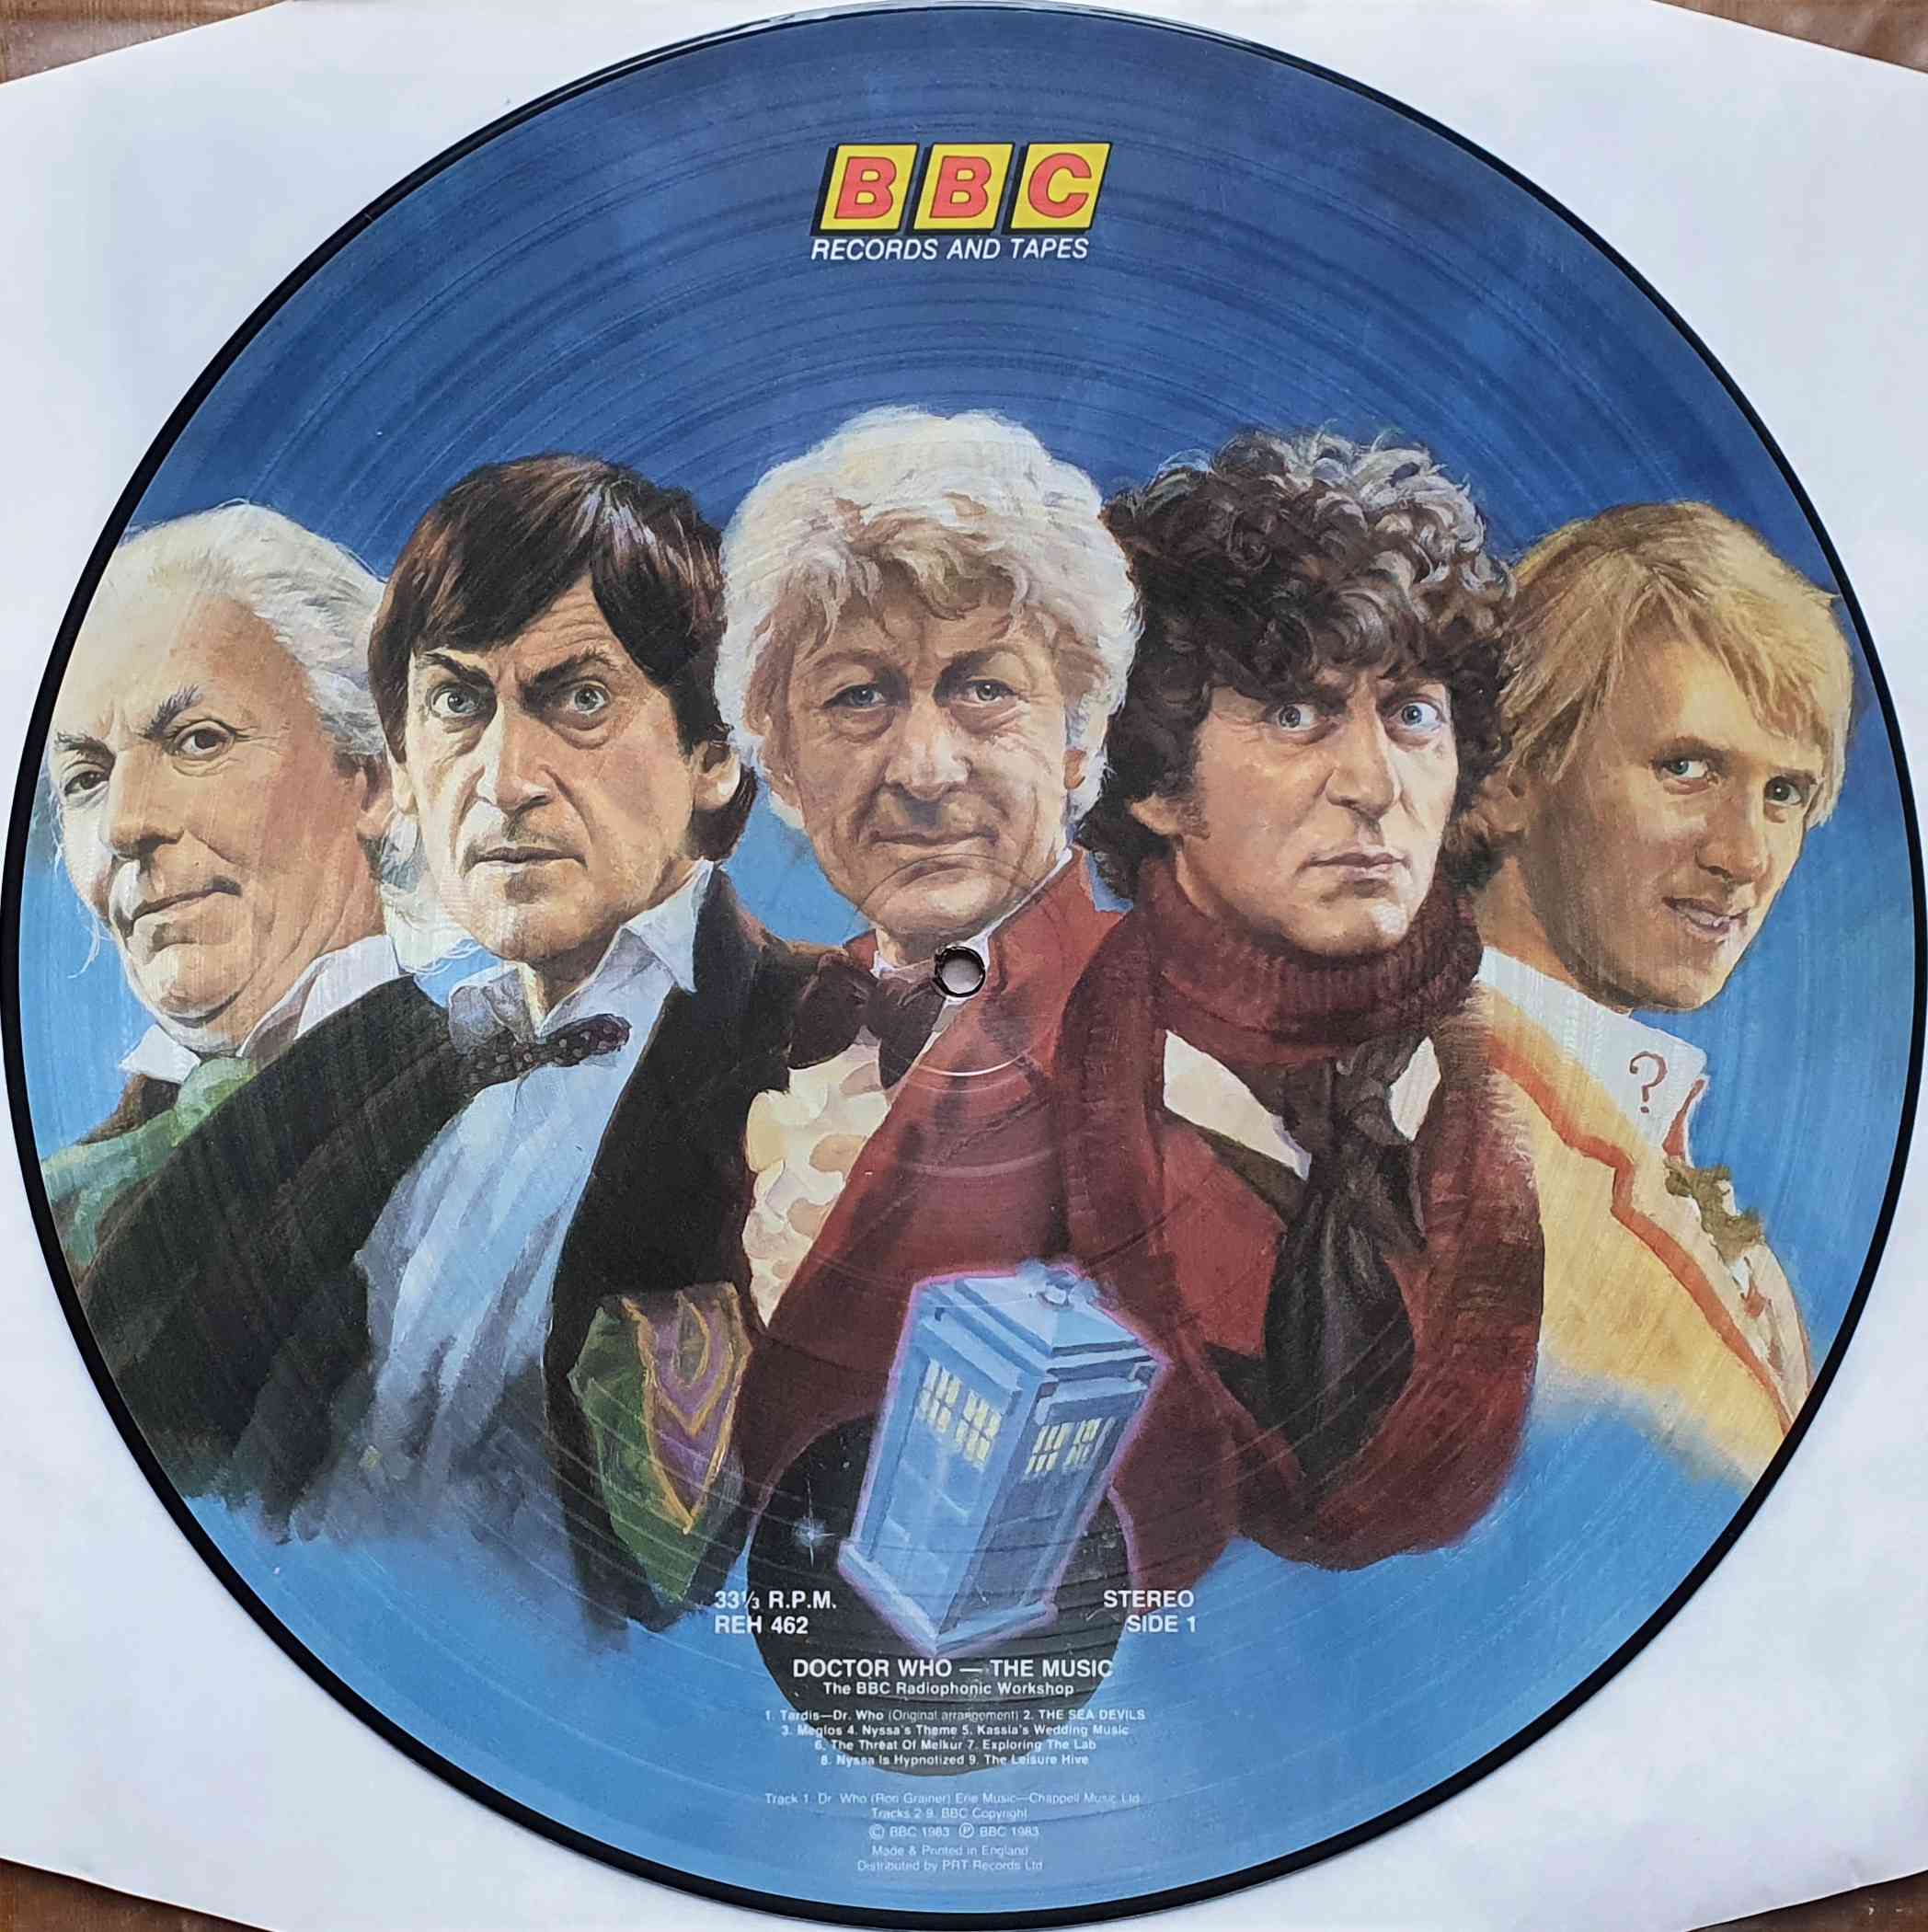 Picture of REH 462 P Doctor Who - The music - Picture Disc by artist Various from the BBC albums - Records and Tapes library